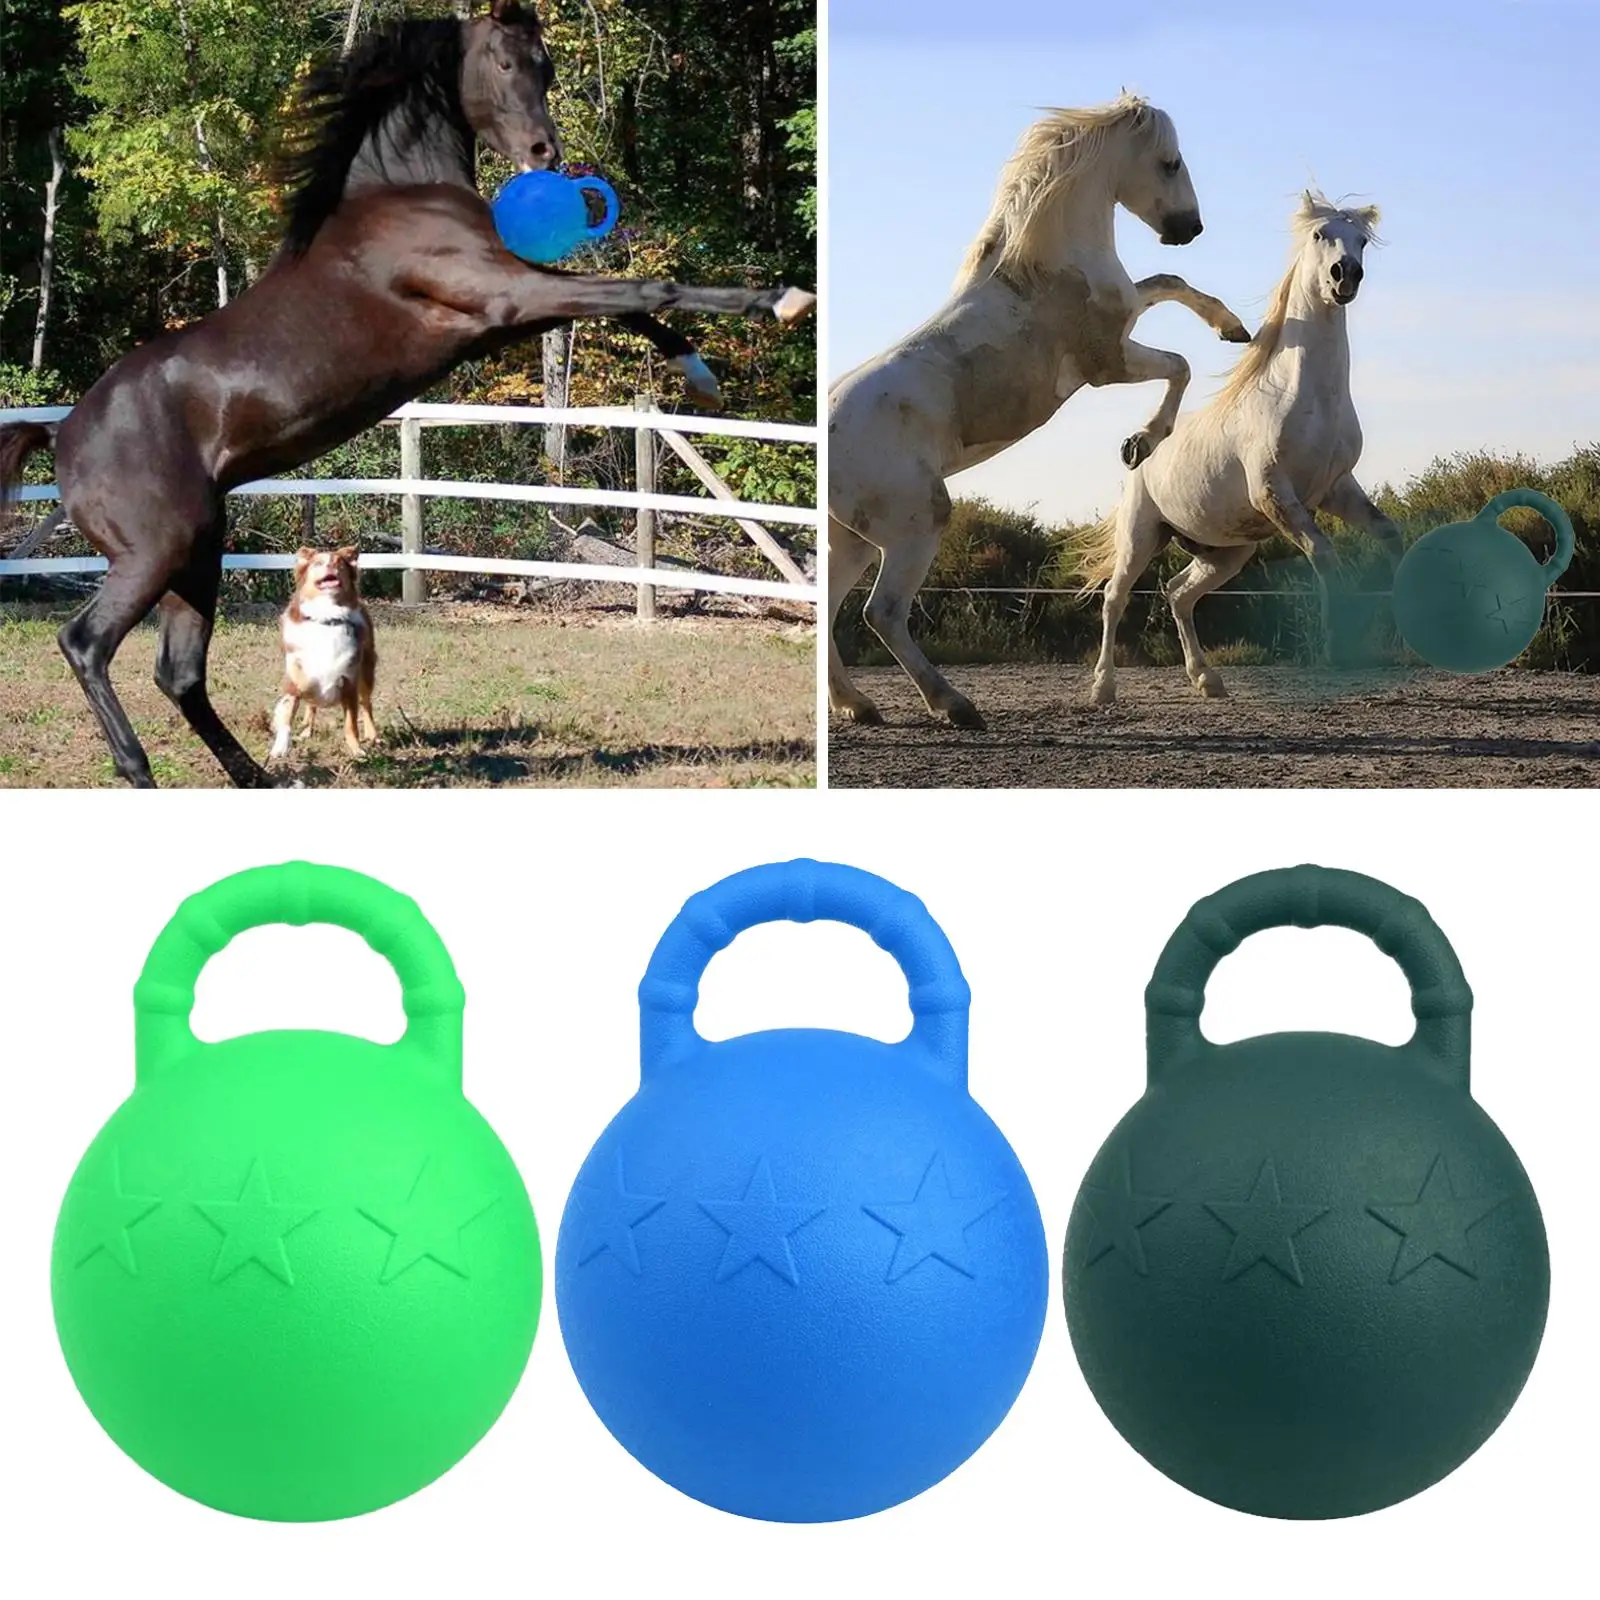 Rubber 25cm Horse Dog Play Ball Toy, Equine Playing Play Bouncing Balls with Handle